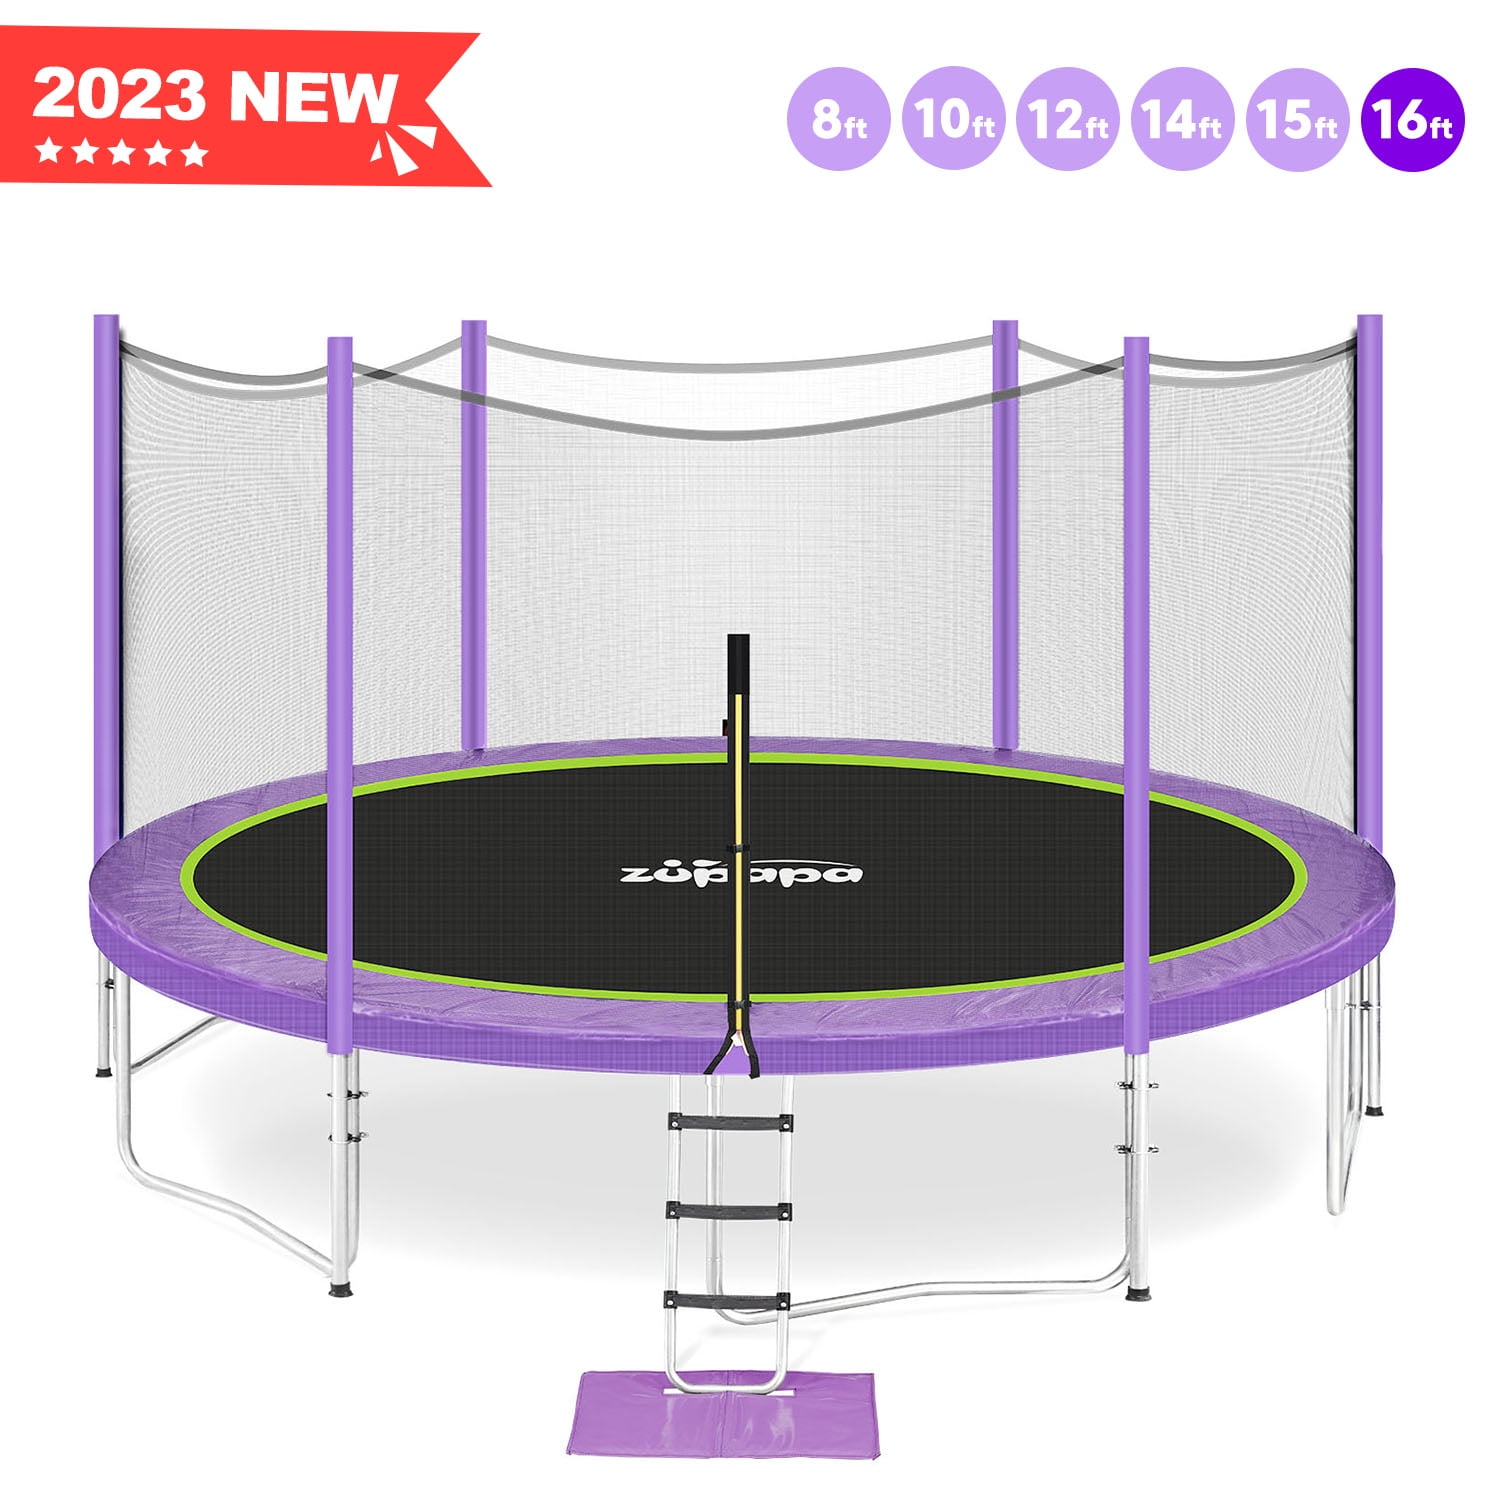 SereneLife 10' Round Backyard Trampoline with Safety Enclosure